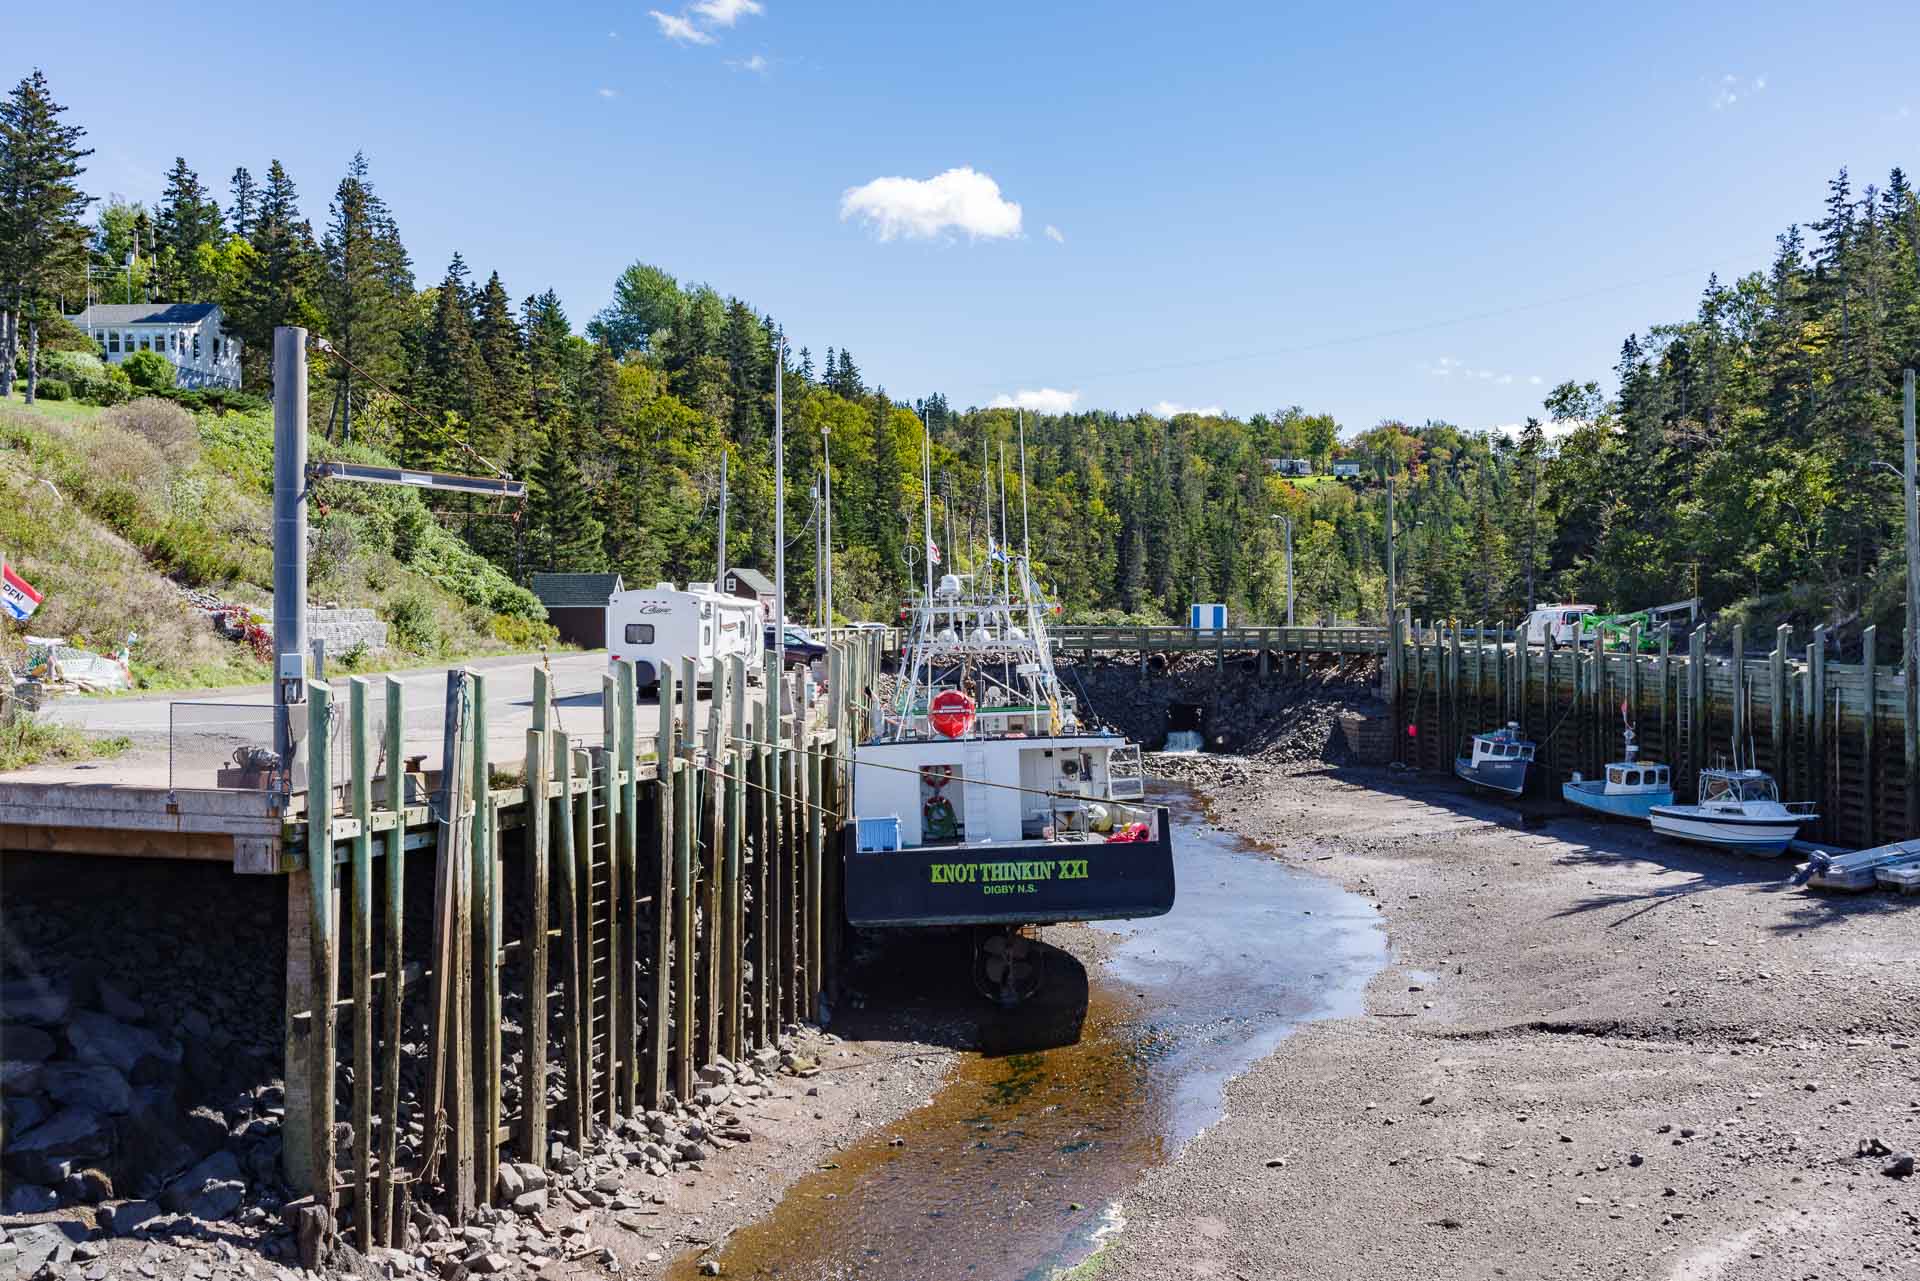 Halls Harbour, Kings County, NS at low tide.-- FF, 1/100, f 11, ISO 200, 34mm (Sept. 27, 2021)